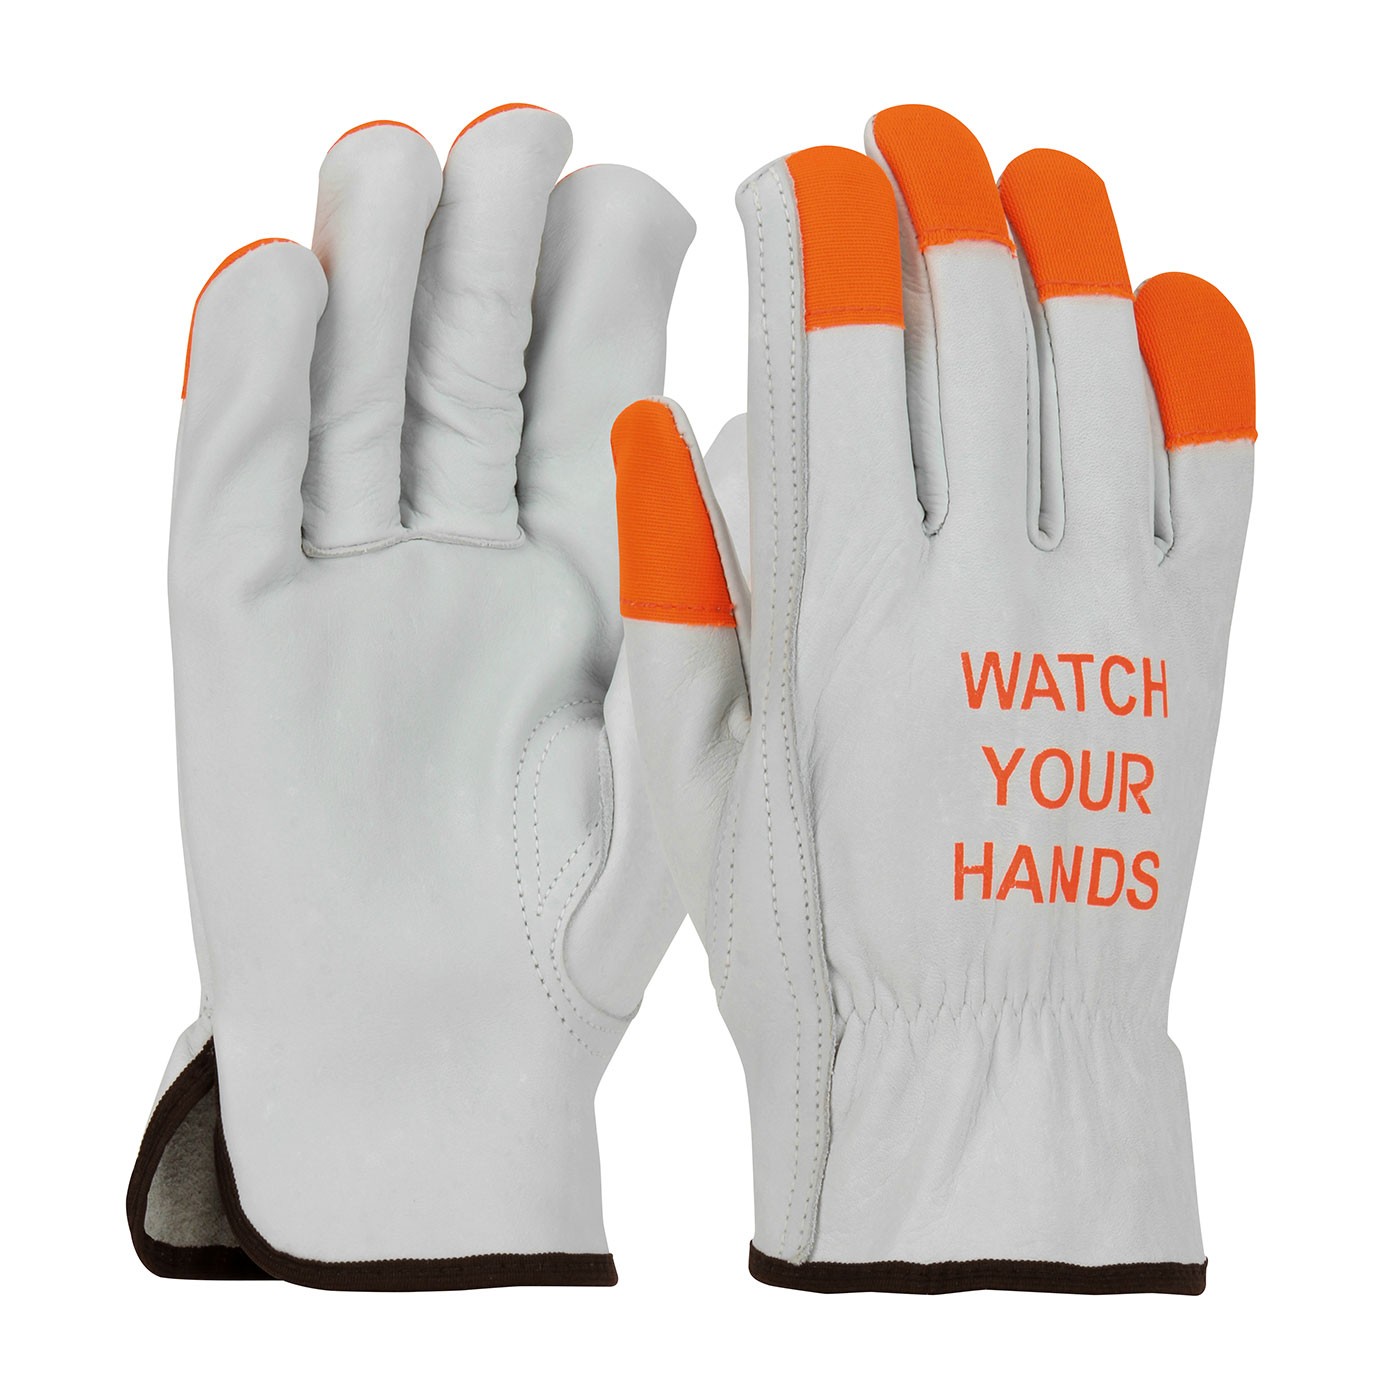 PIP® Economy Grade Top Grain Cowhide Leather Drivers Glove with Hi-Vis Fingertips and "Watch Your Hands" Logo - Keystone Thumb  (#68-162HV)